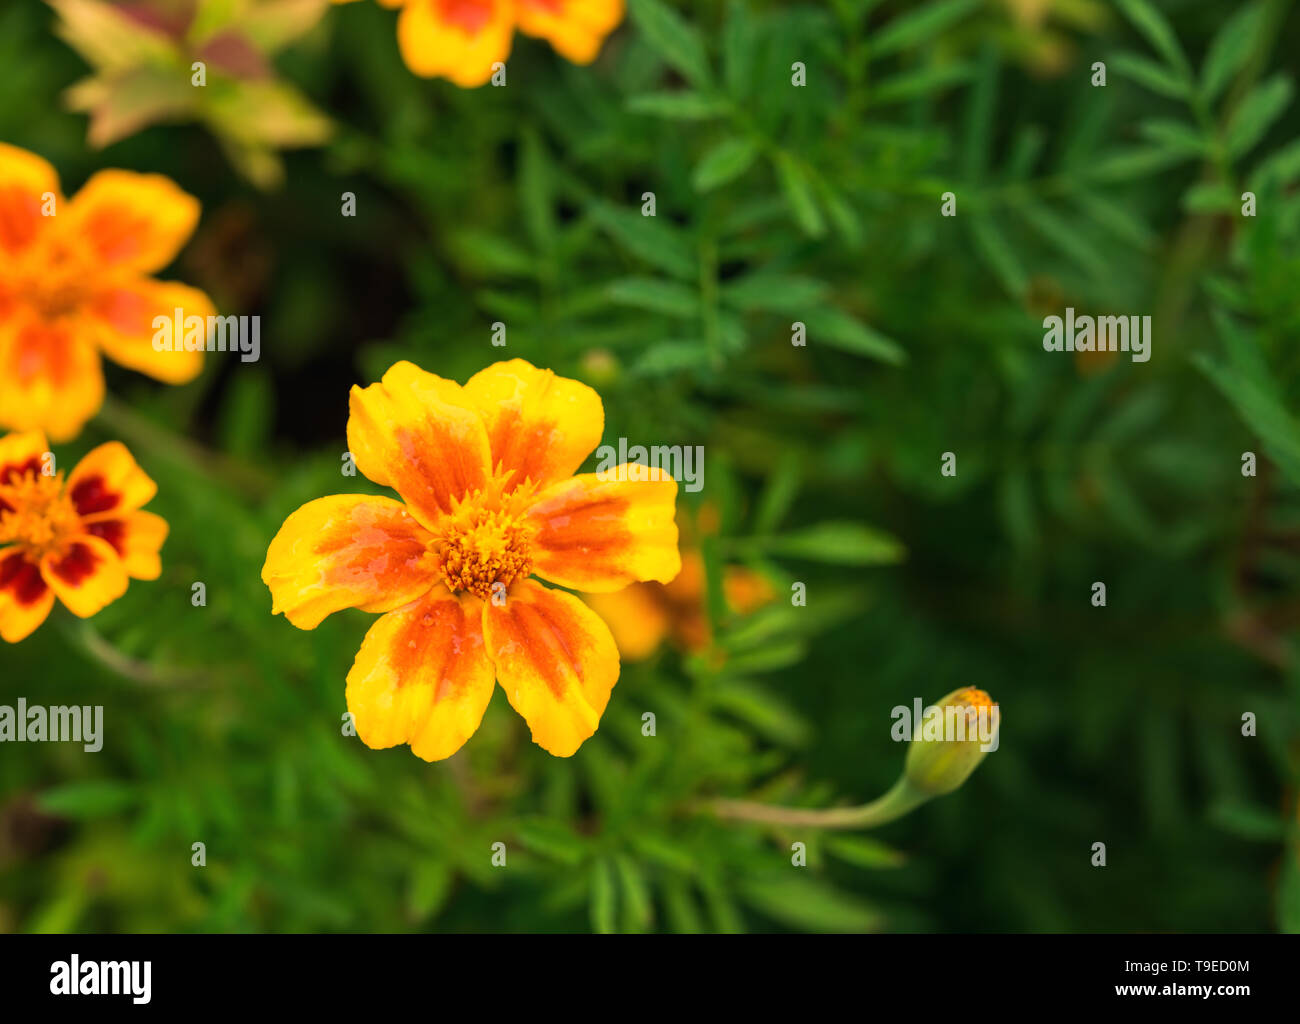 Bright, hot yellow and orange red tagetes flower and bud with unfocused green foliage and few flowers at background. Selective focus. Greeting card ba Stock Photo